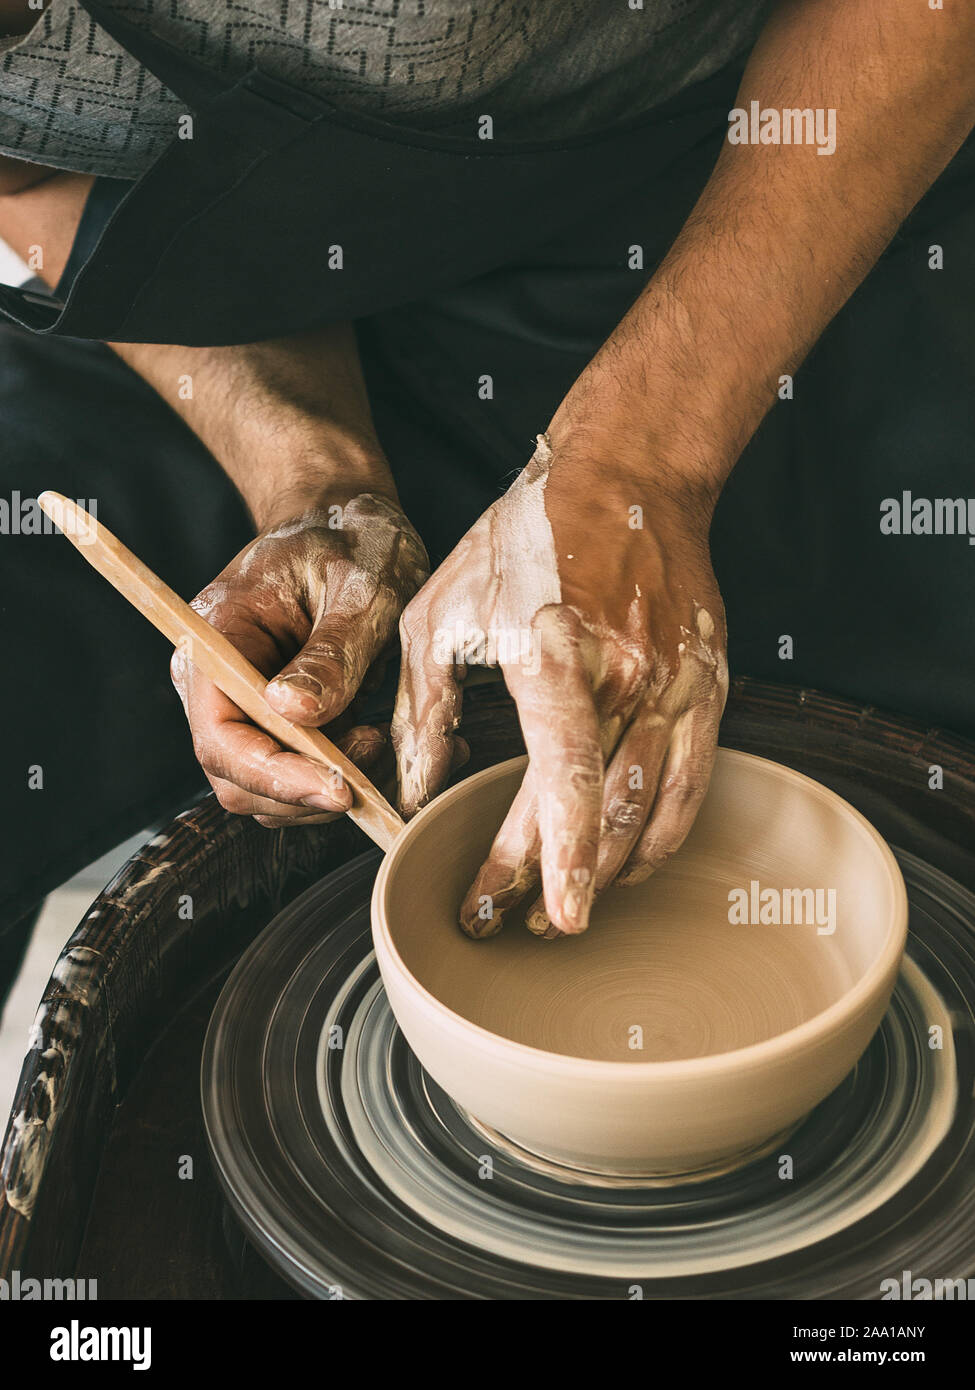 Man potterist making bowl on a potters wheel from clay in a